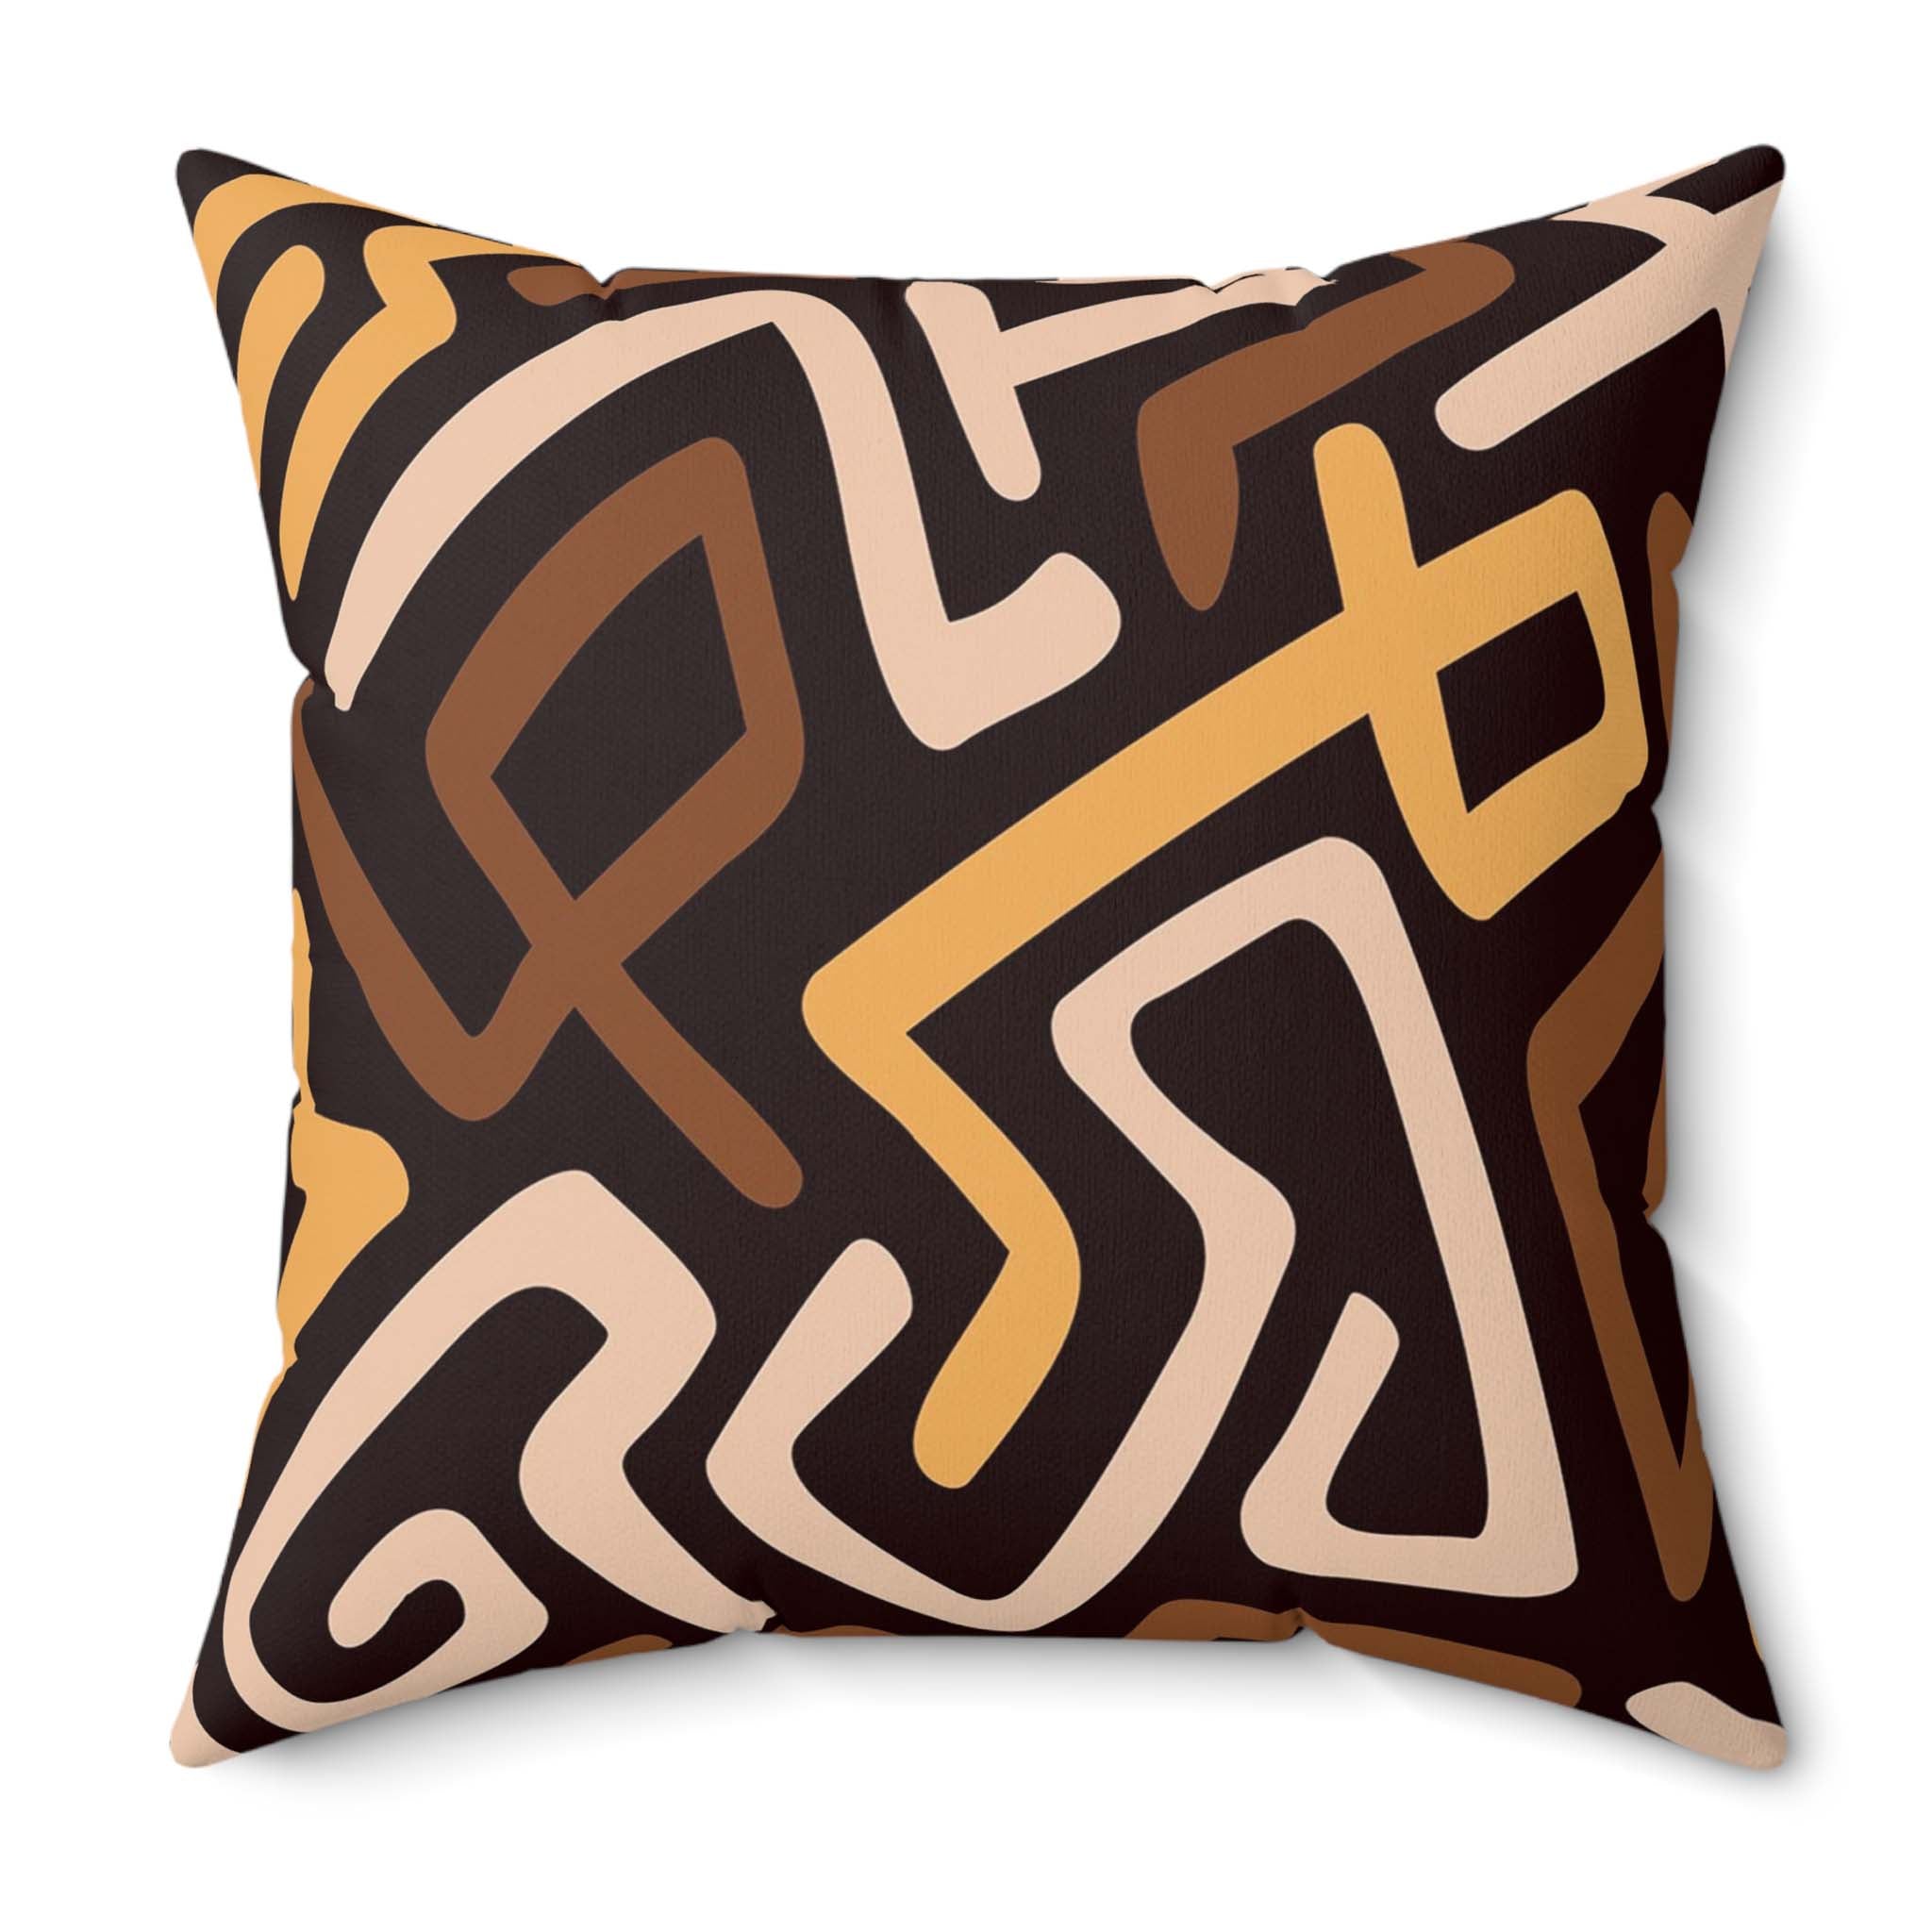 African Pillow Cases Cushion Throw Cover in Kuba Print